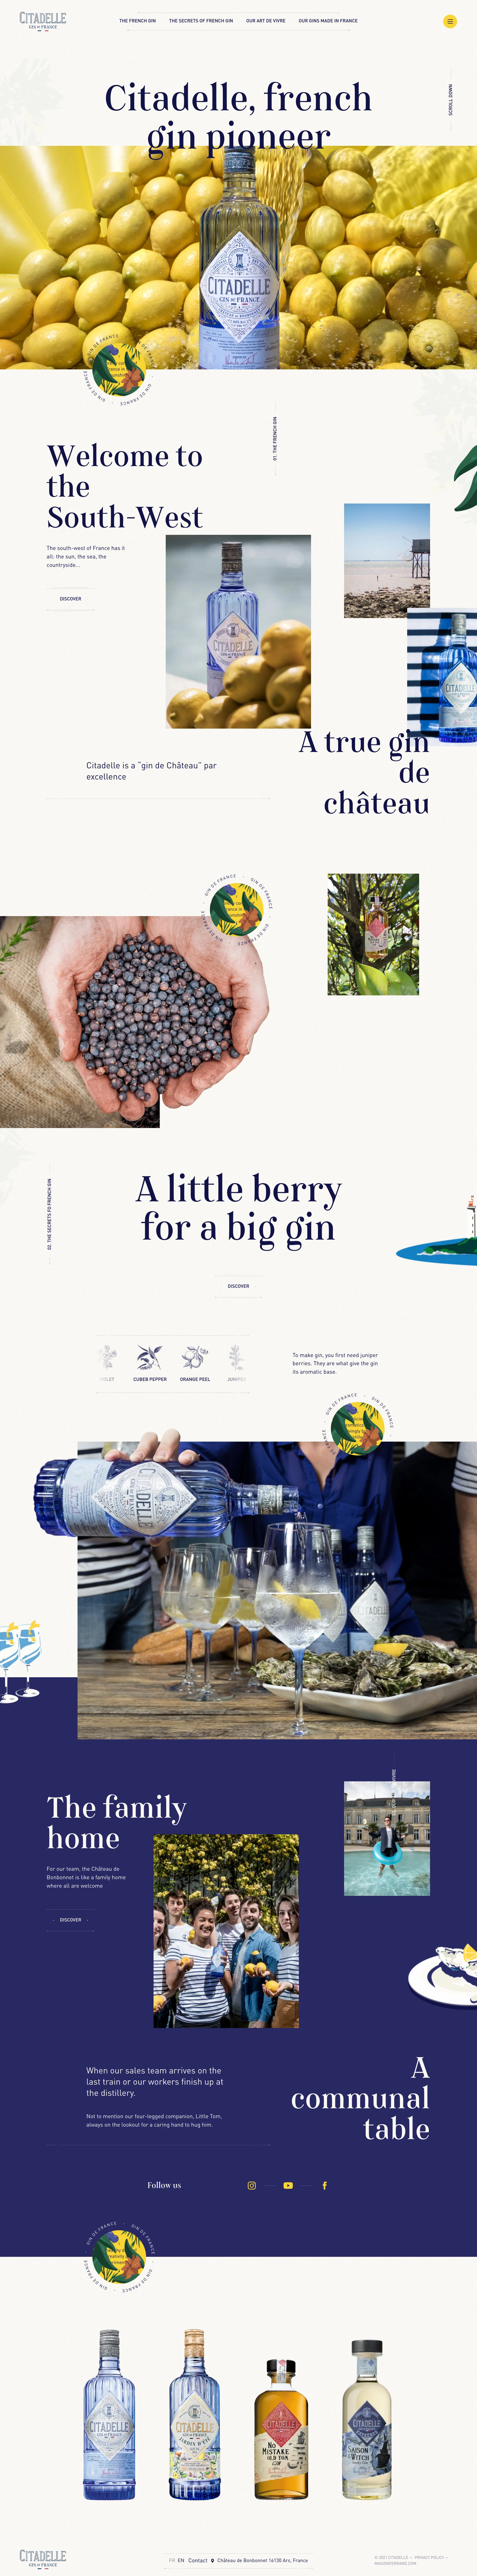 Citadelle Landing Page Example: Citadelle,french gin pioneer.